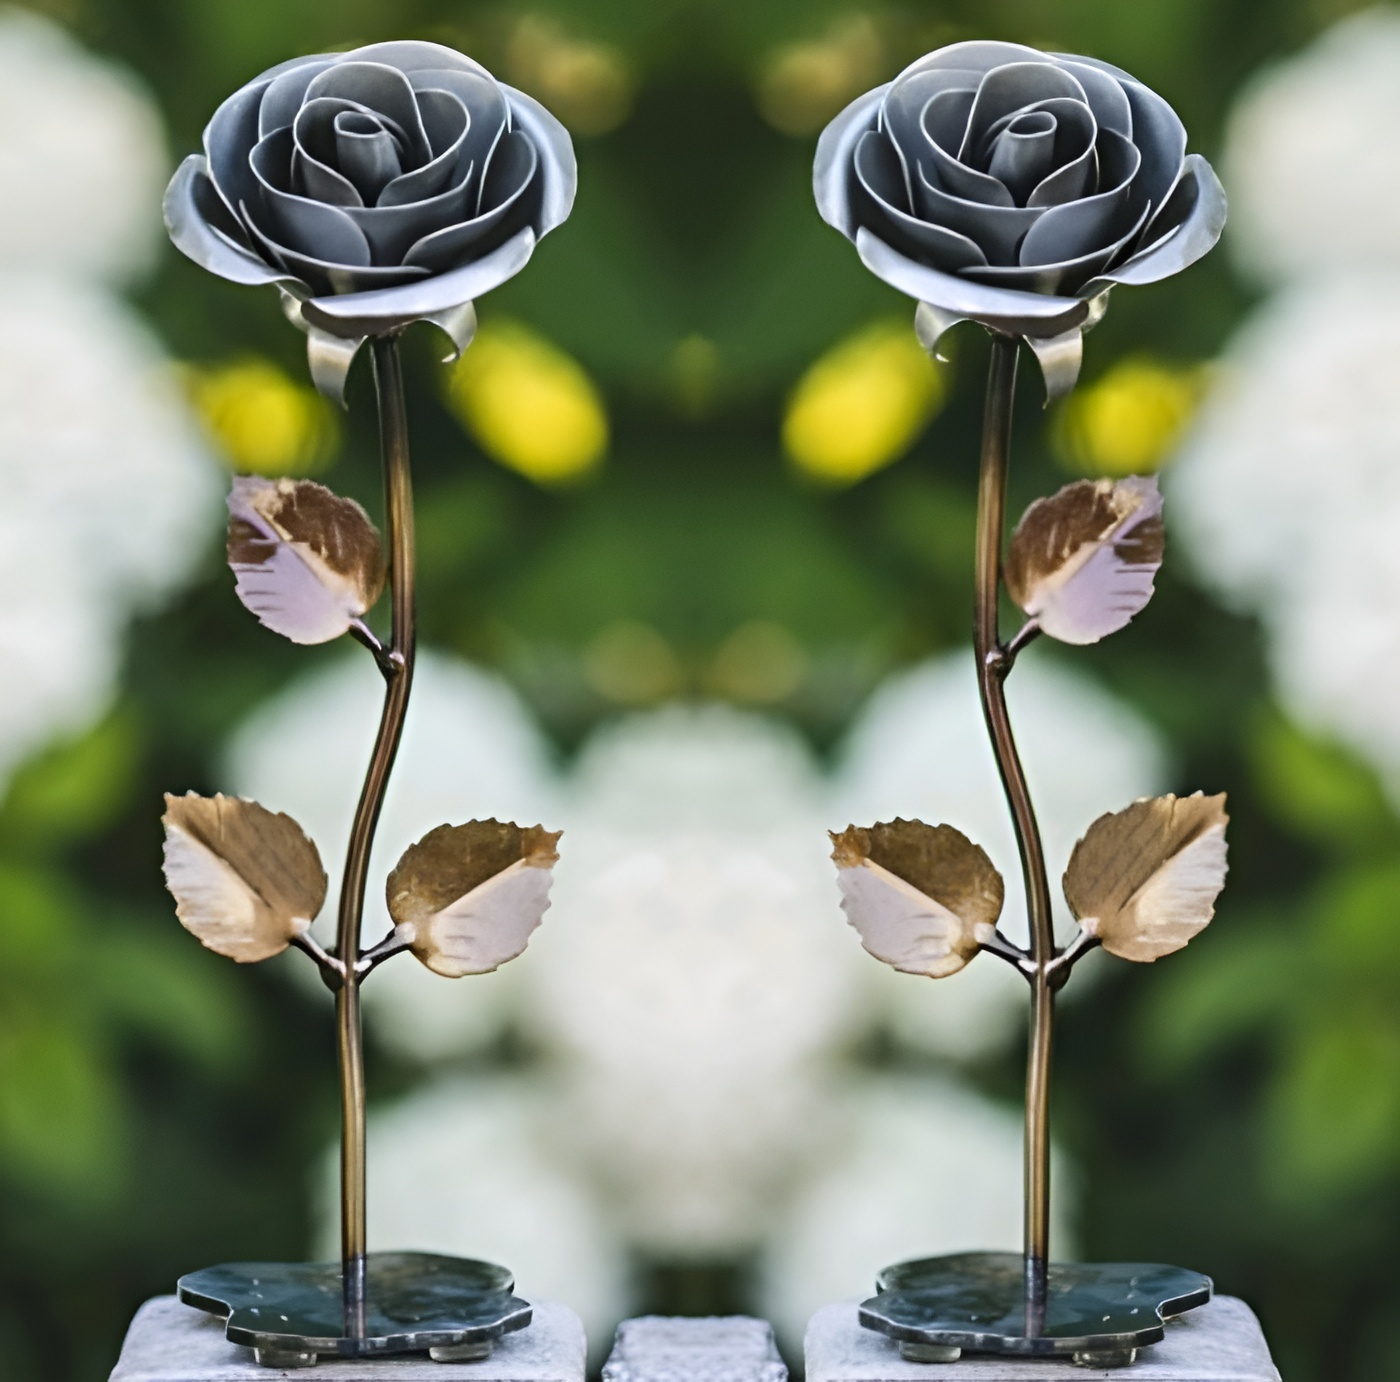 Silver Mental Rose for 25th Anniversary